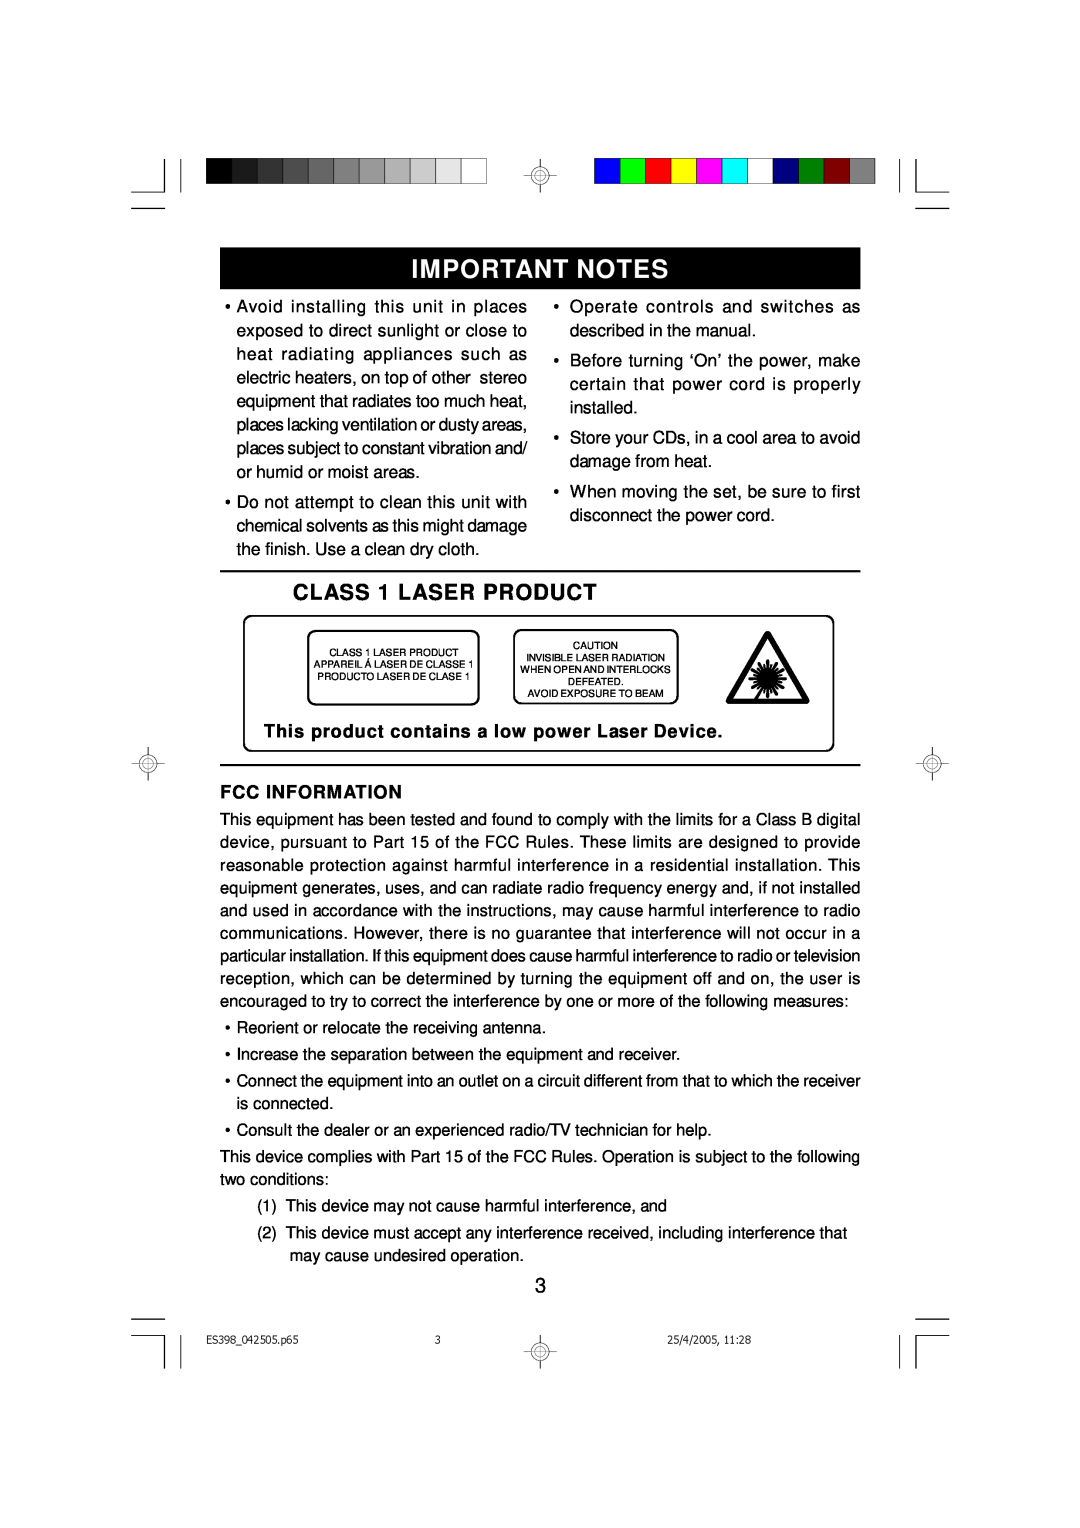 Emerson ES398 Important Notes, CLASS 1 LASER PRODUCT, This product contains a low power Laser Device, Fcc Information 